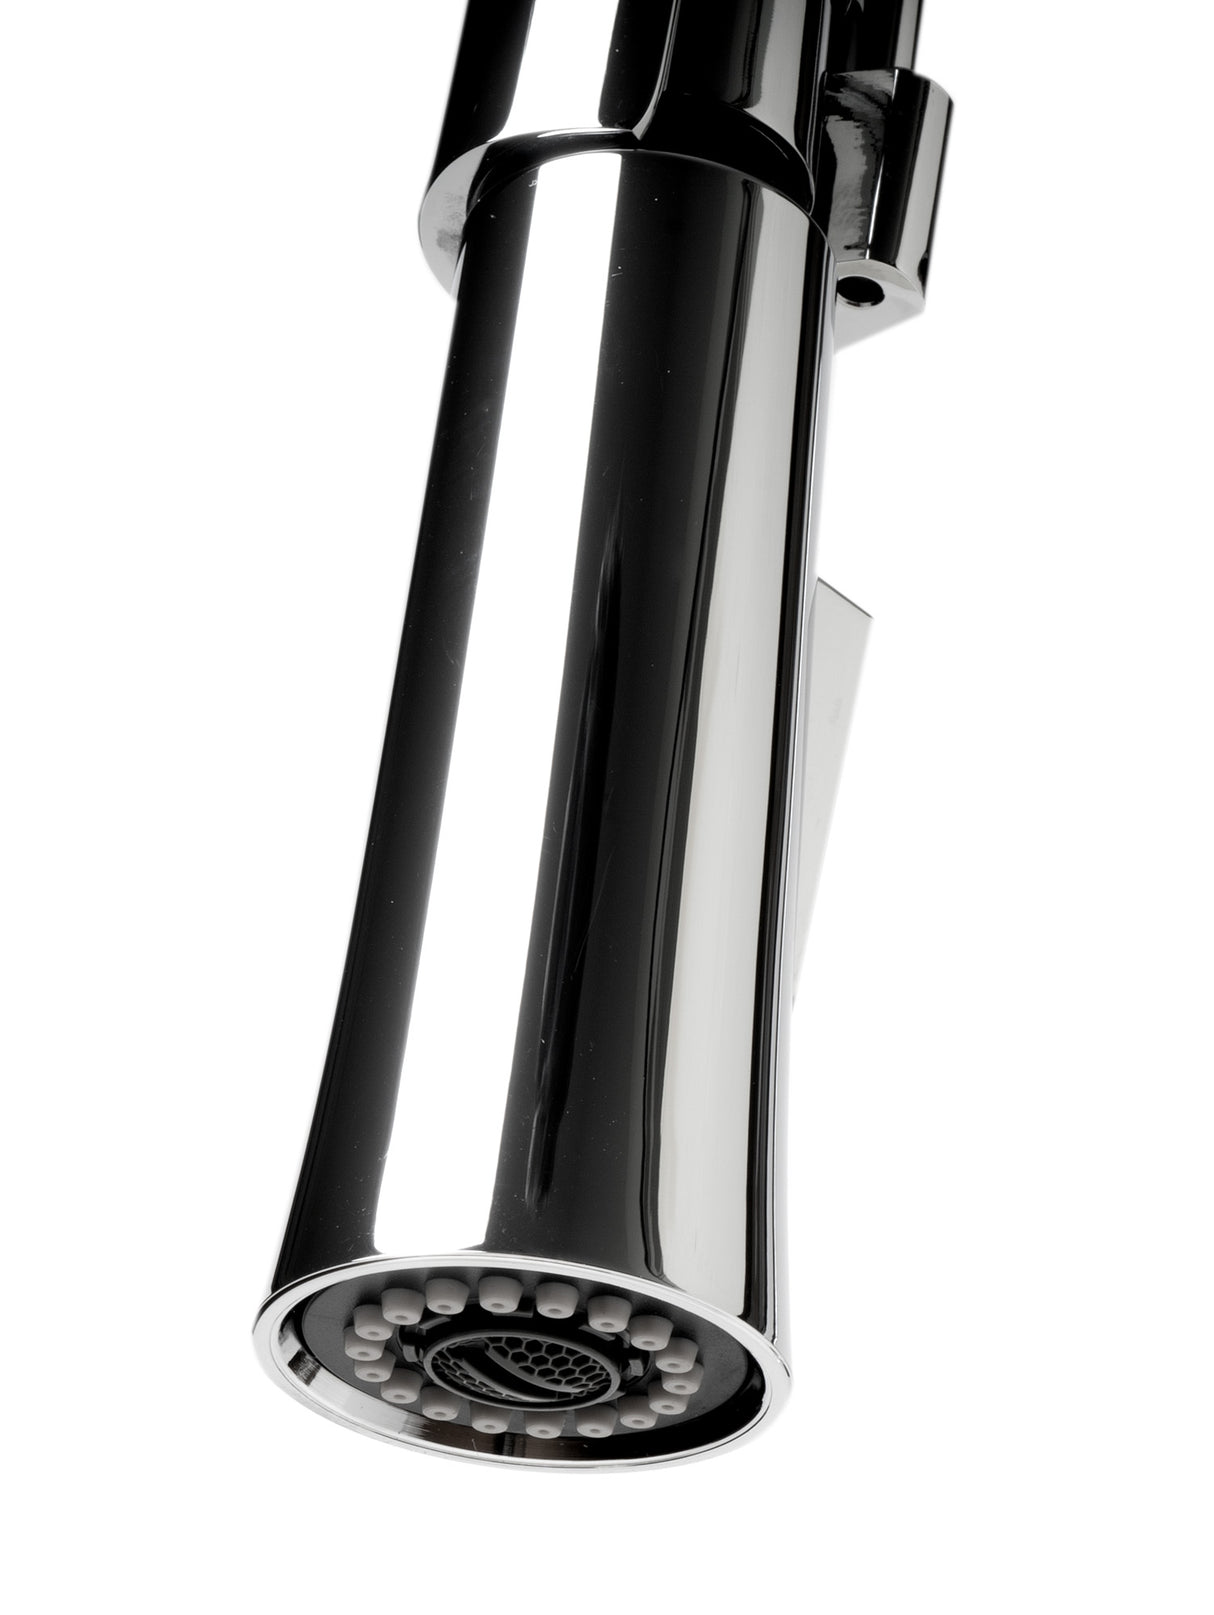 Polished Chrome Square Kitchen Faucet with Black Rubber Stem